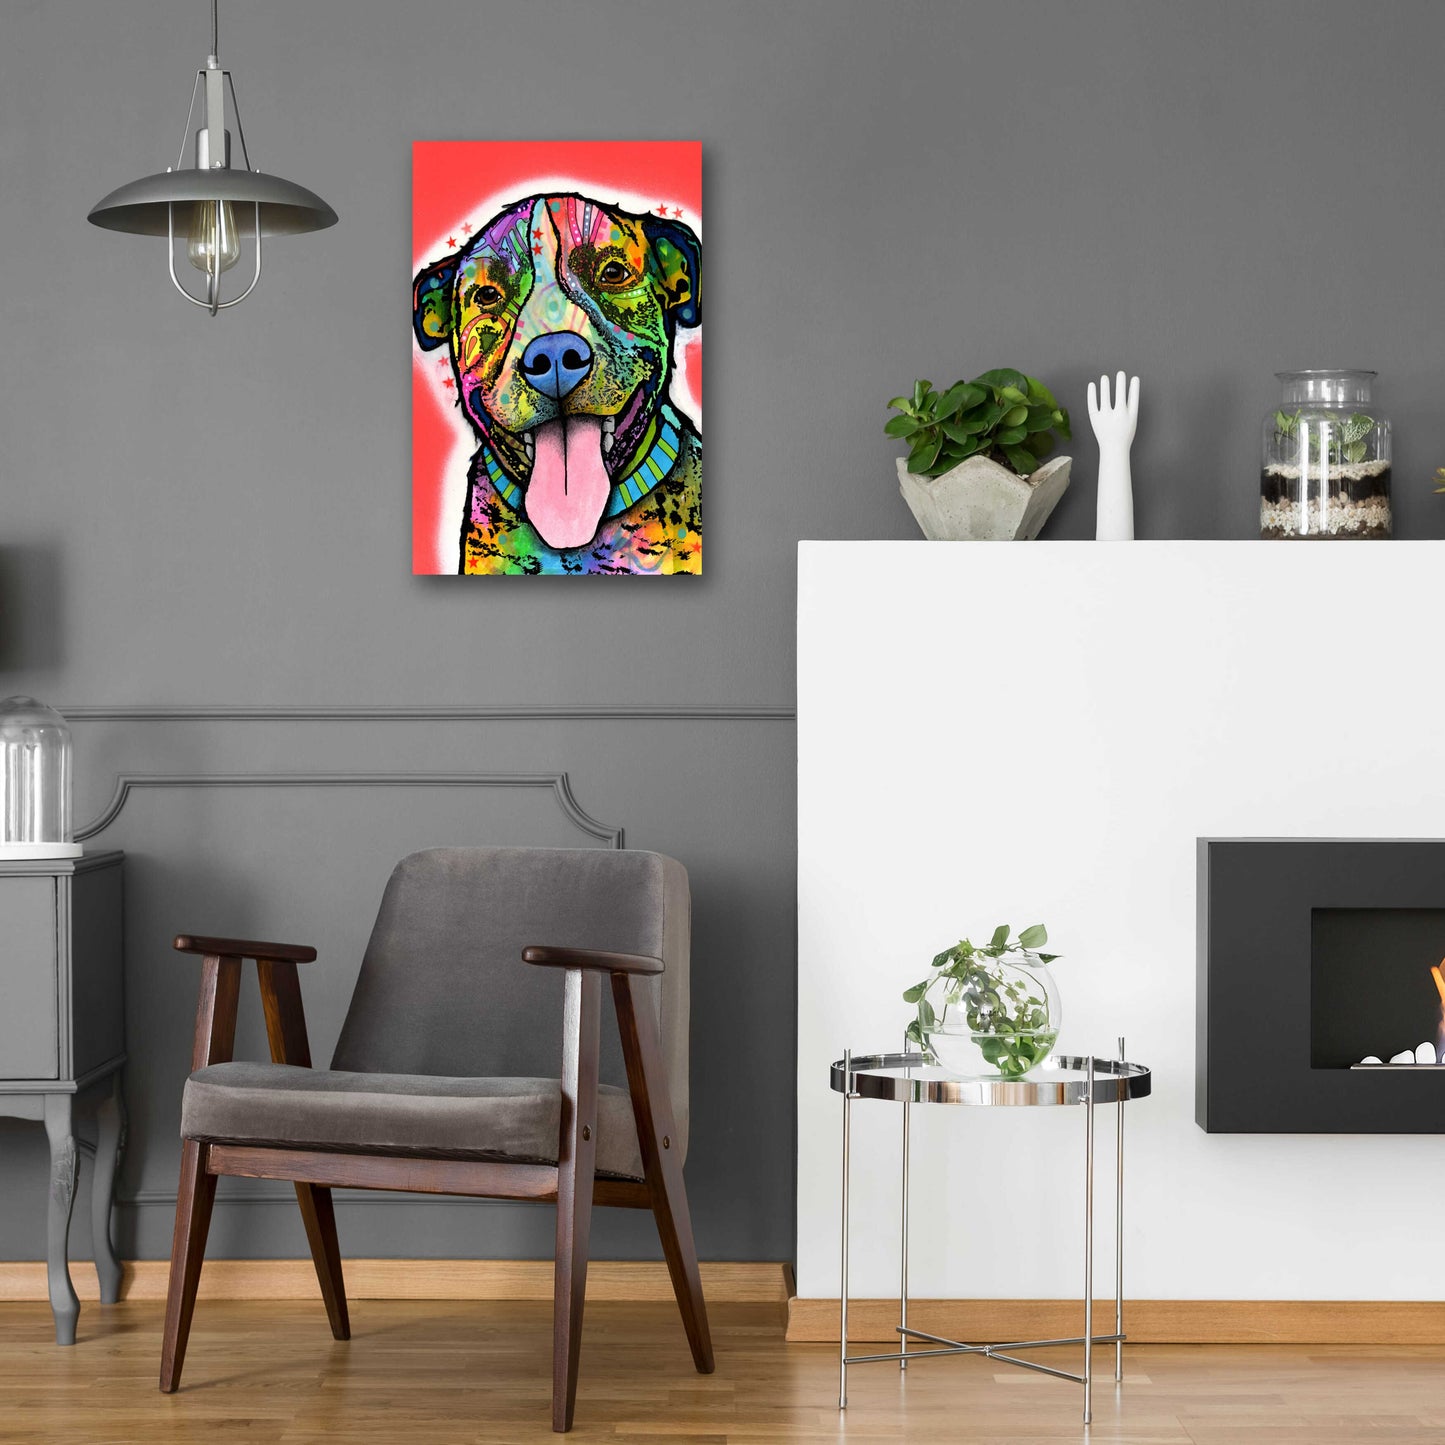 Epic Art 'Smiling Pit Bull zoey' by Dean Russo, Acrylic Glass Wall Art,16x24